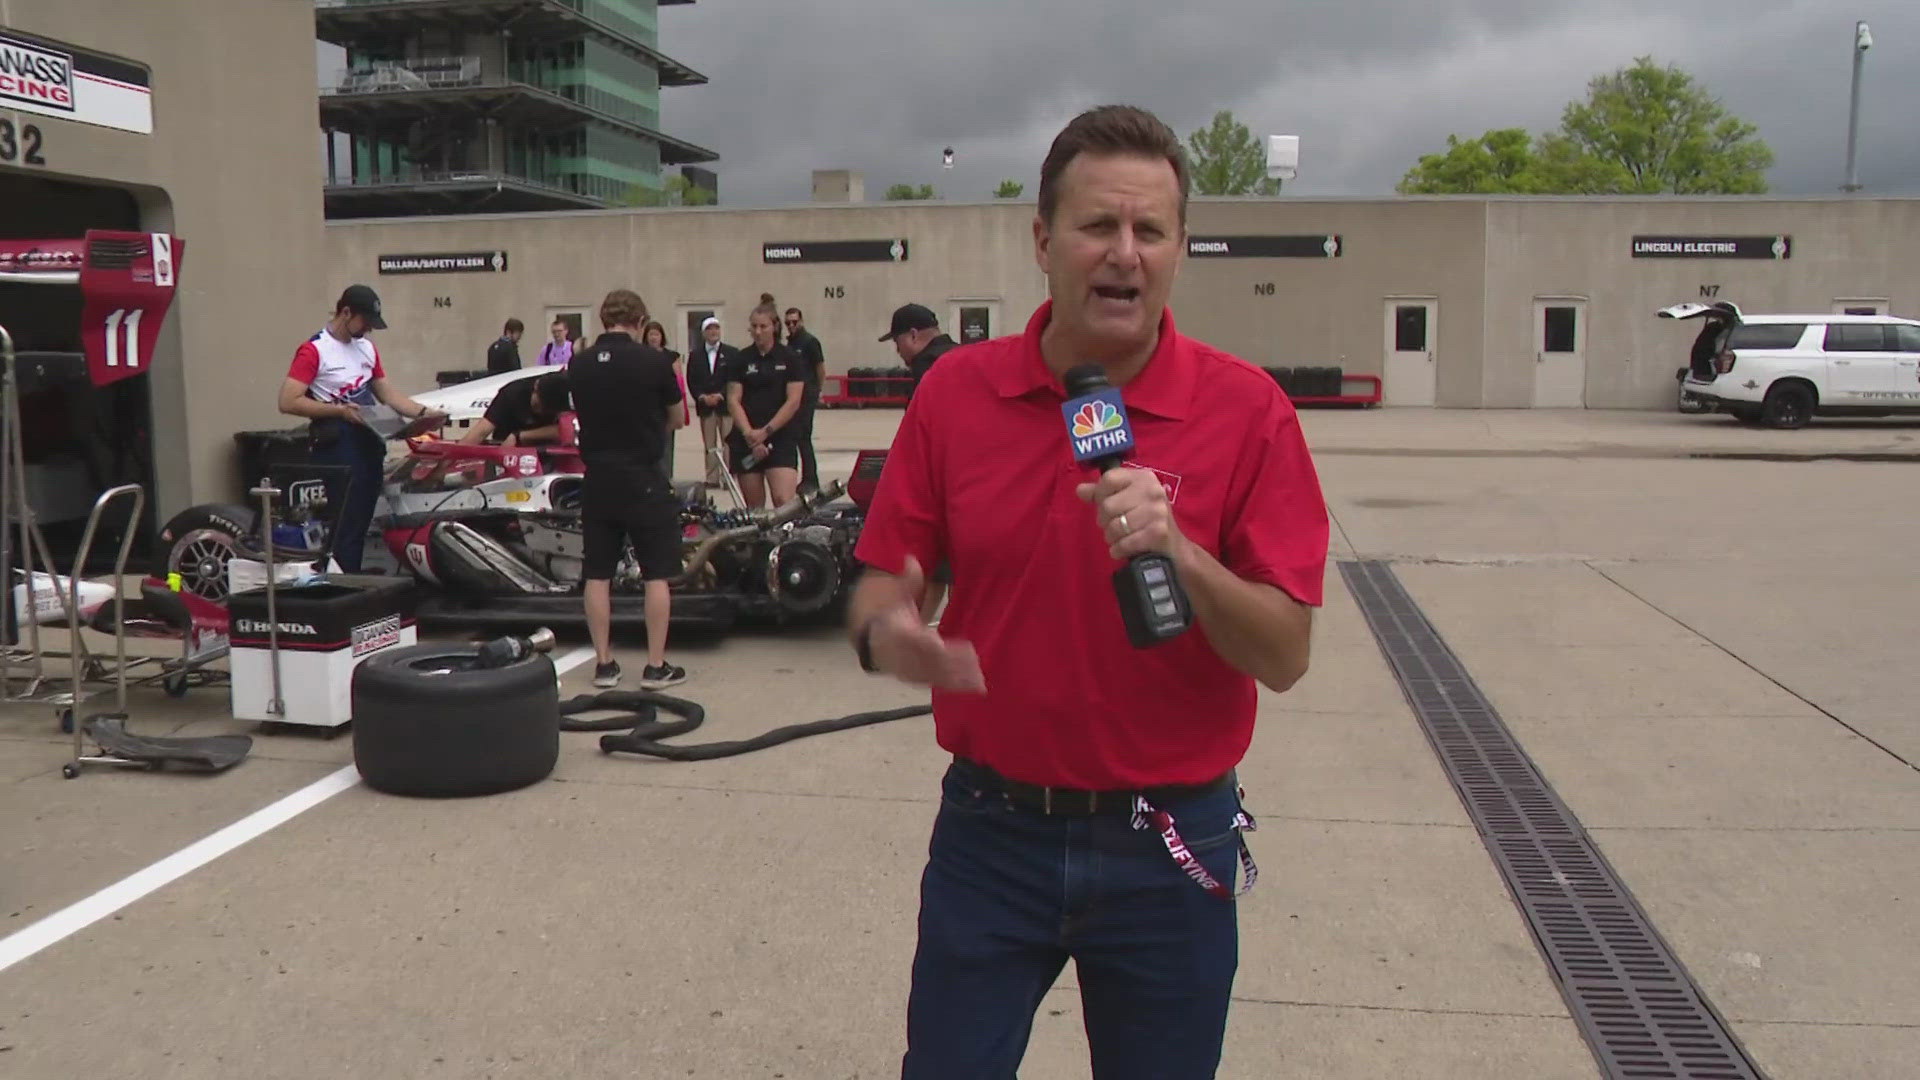 13Sports director Dave Calabro reports from Gasoline Alley during move-in day at the Indianapolis Motor Speedway.